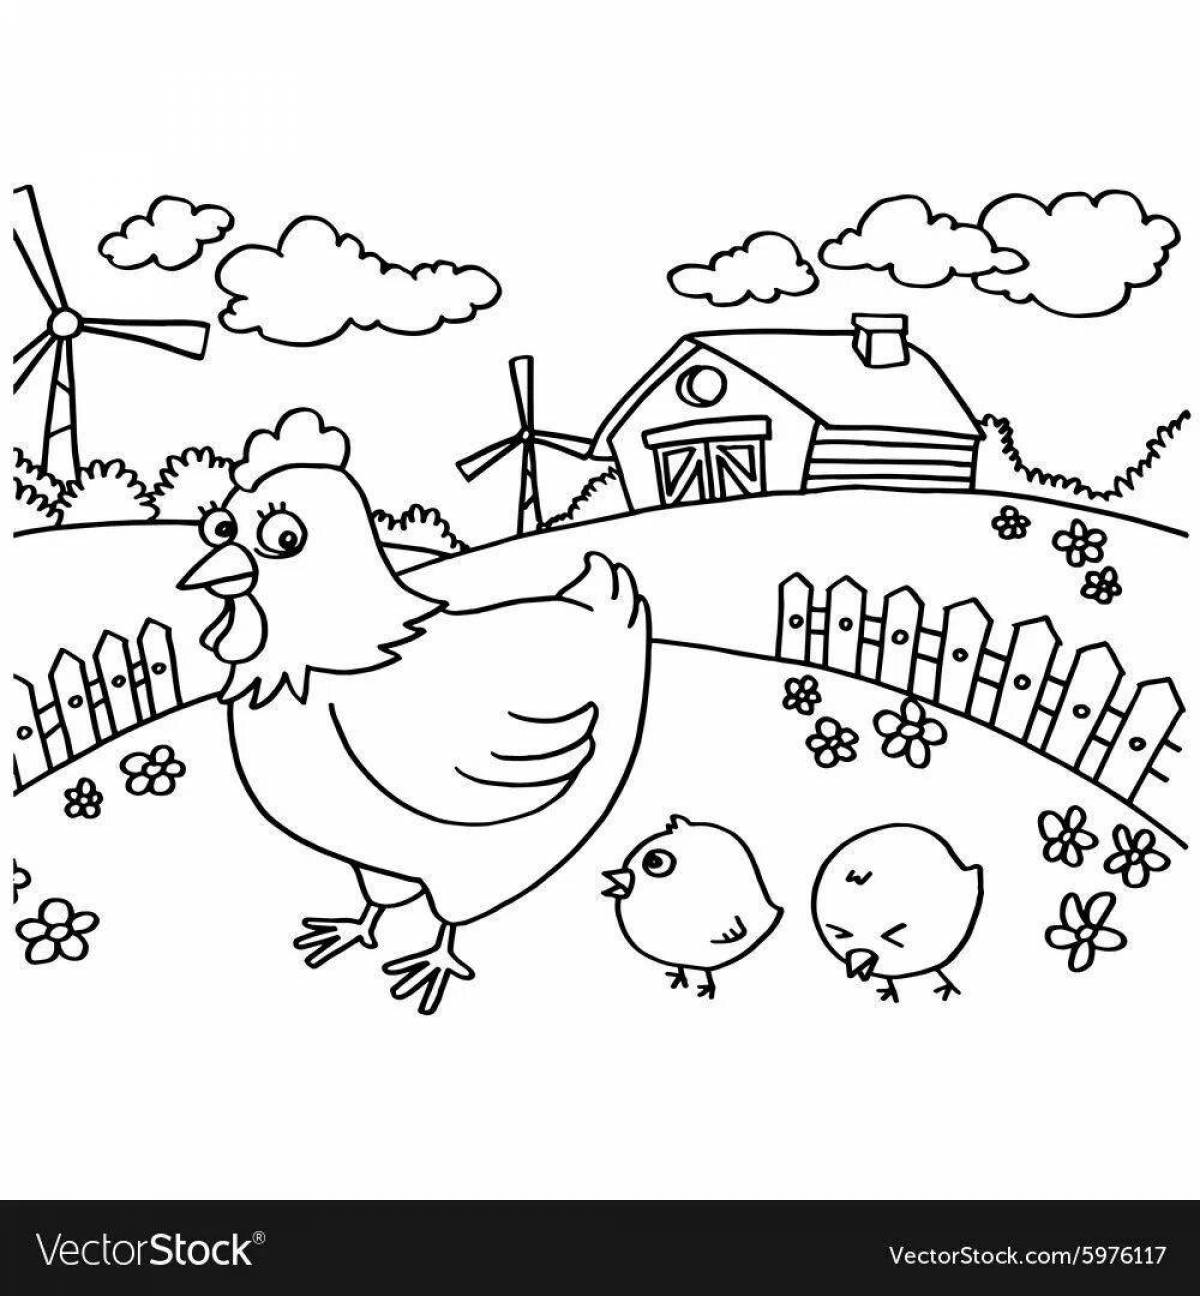 Vibrant bird yard coloring page for kids